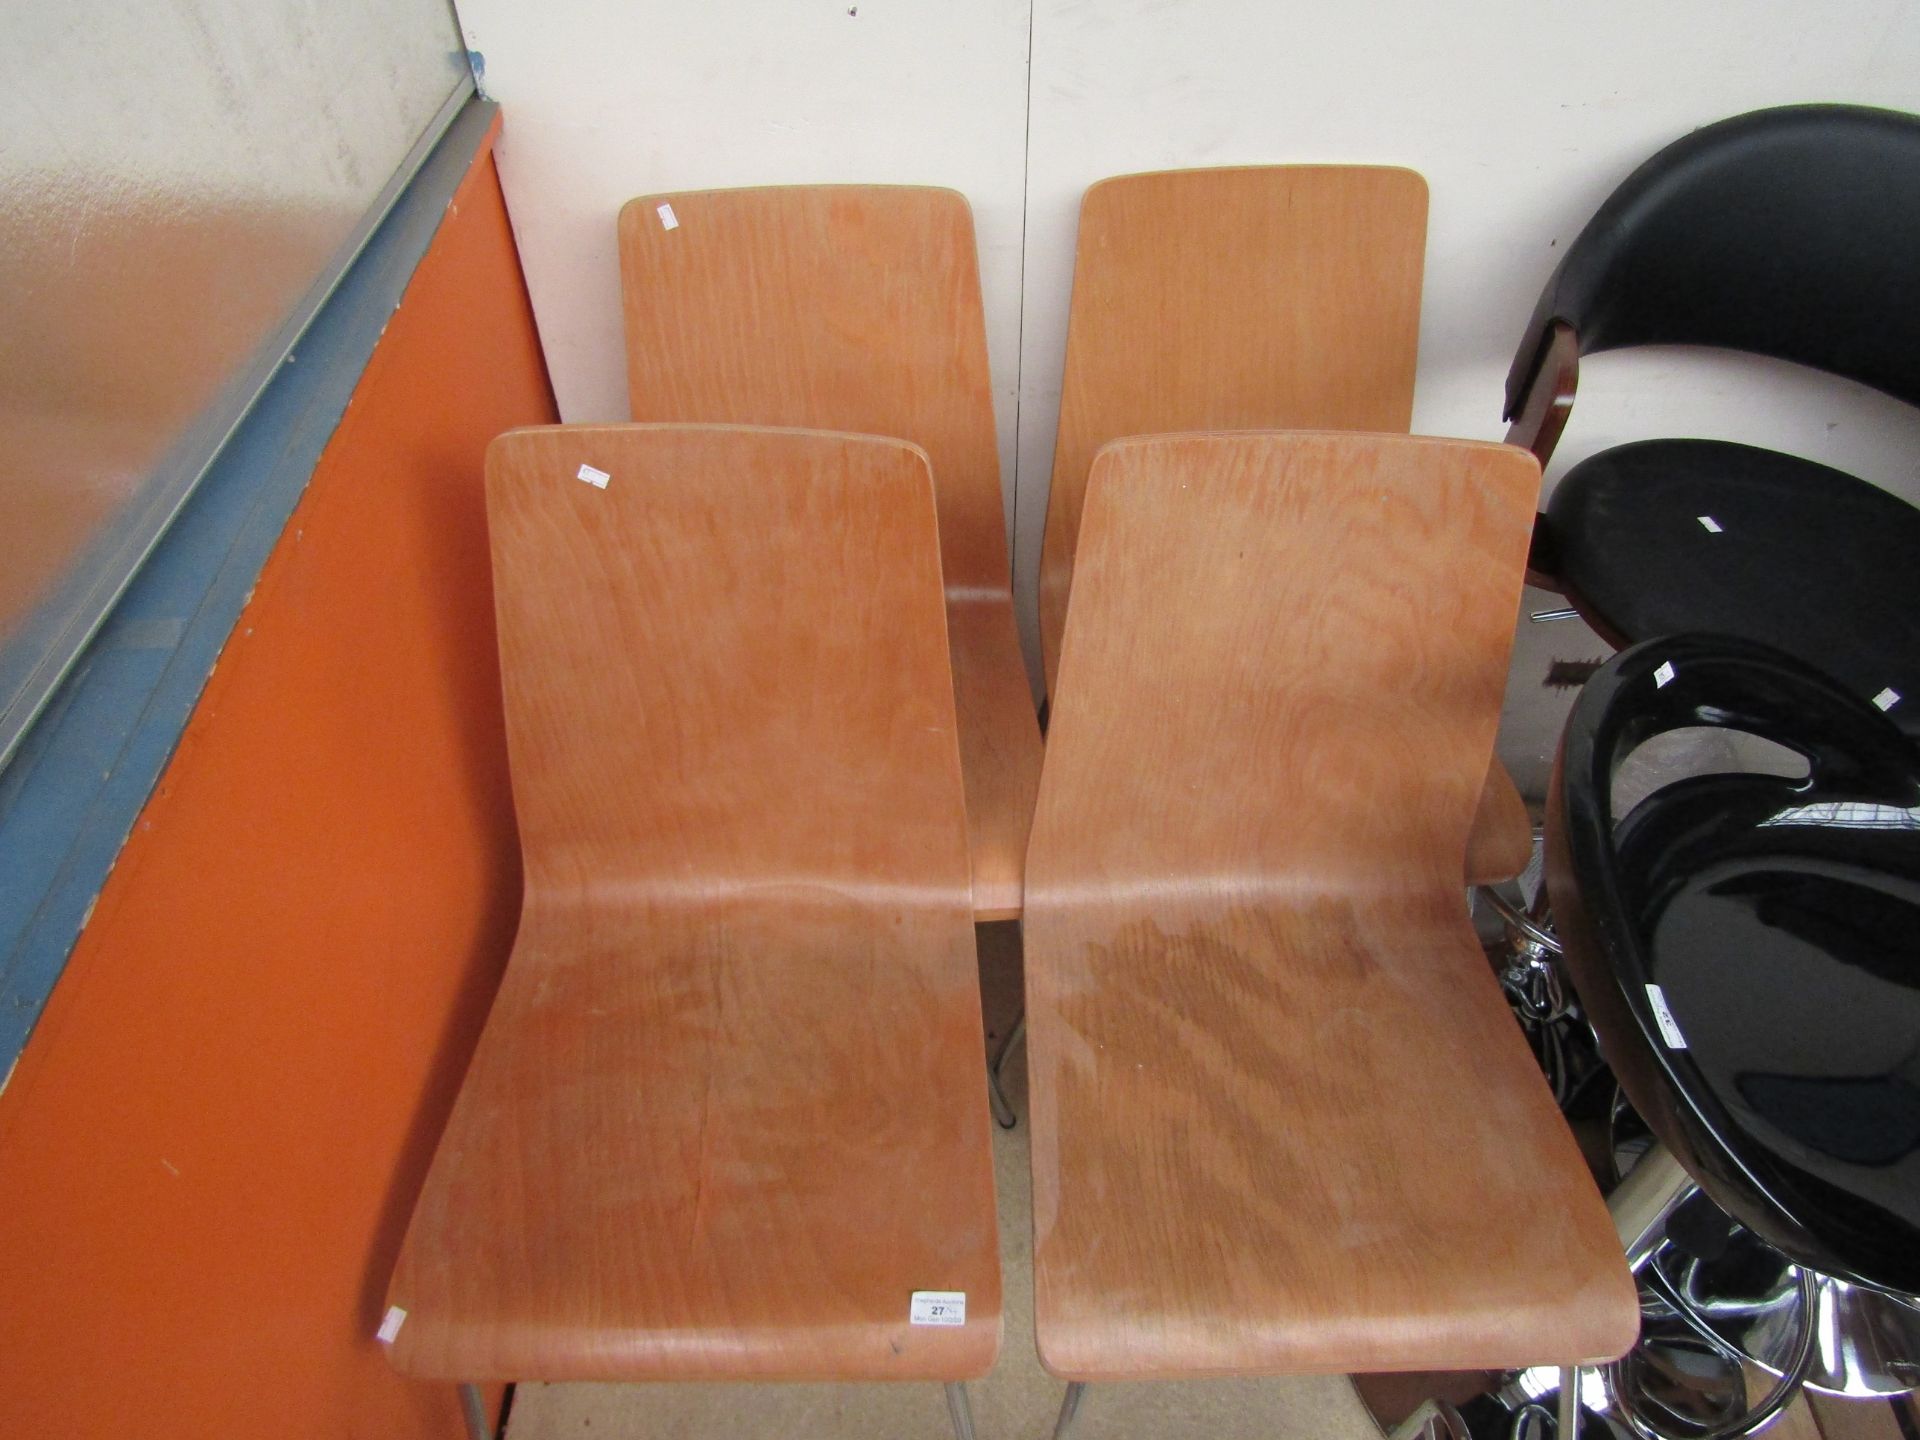 4 x Wooden Dining Chairs with Chrome Legs. Would look great sanded down & Varnished.